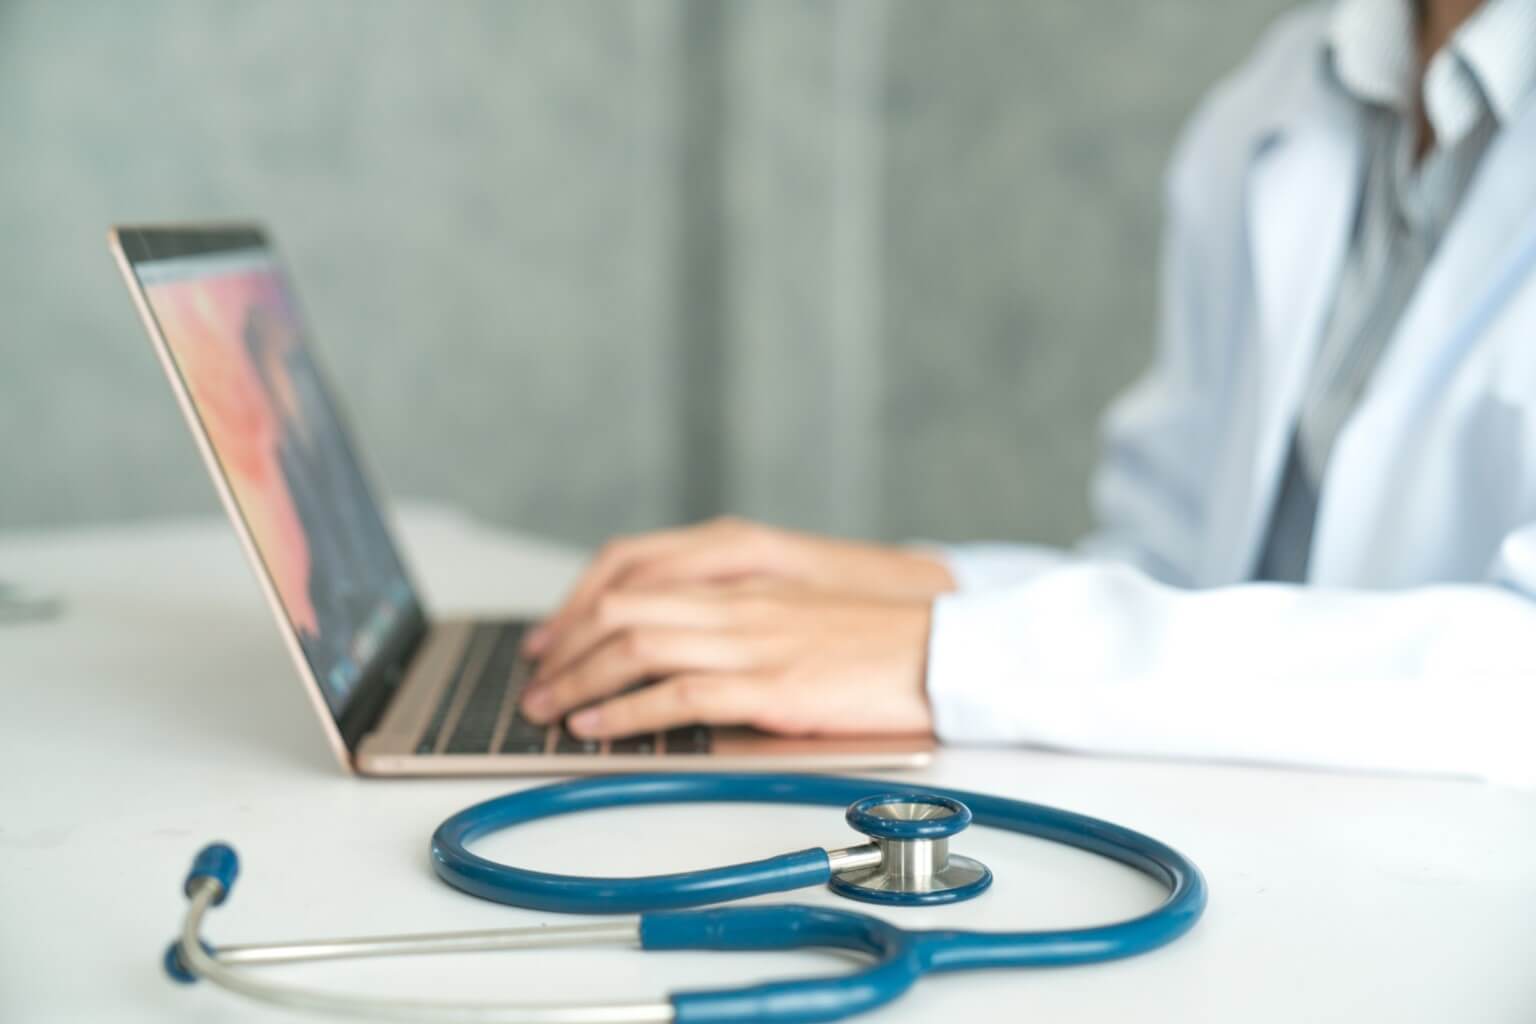 Five ways to improve clinical documentation and bridge the gap between coders and physicians